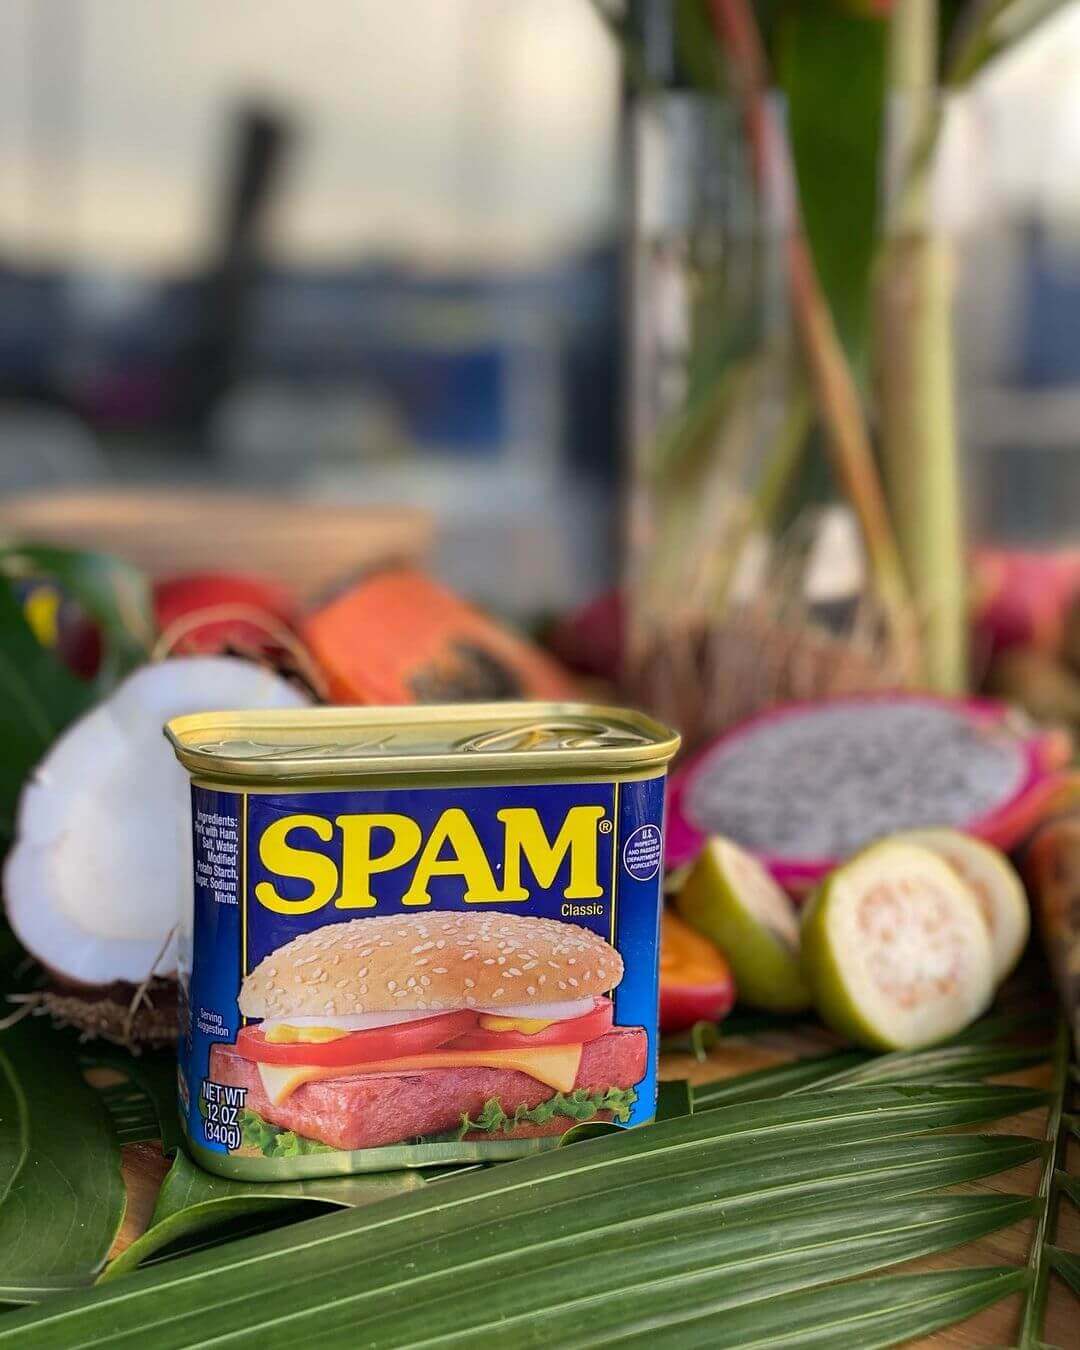 who consumes the most SPAM in the world